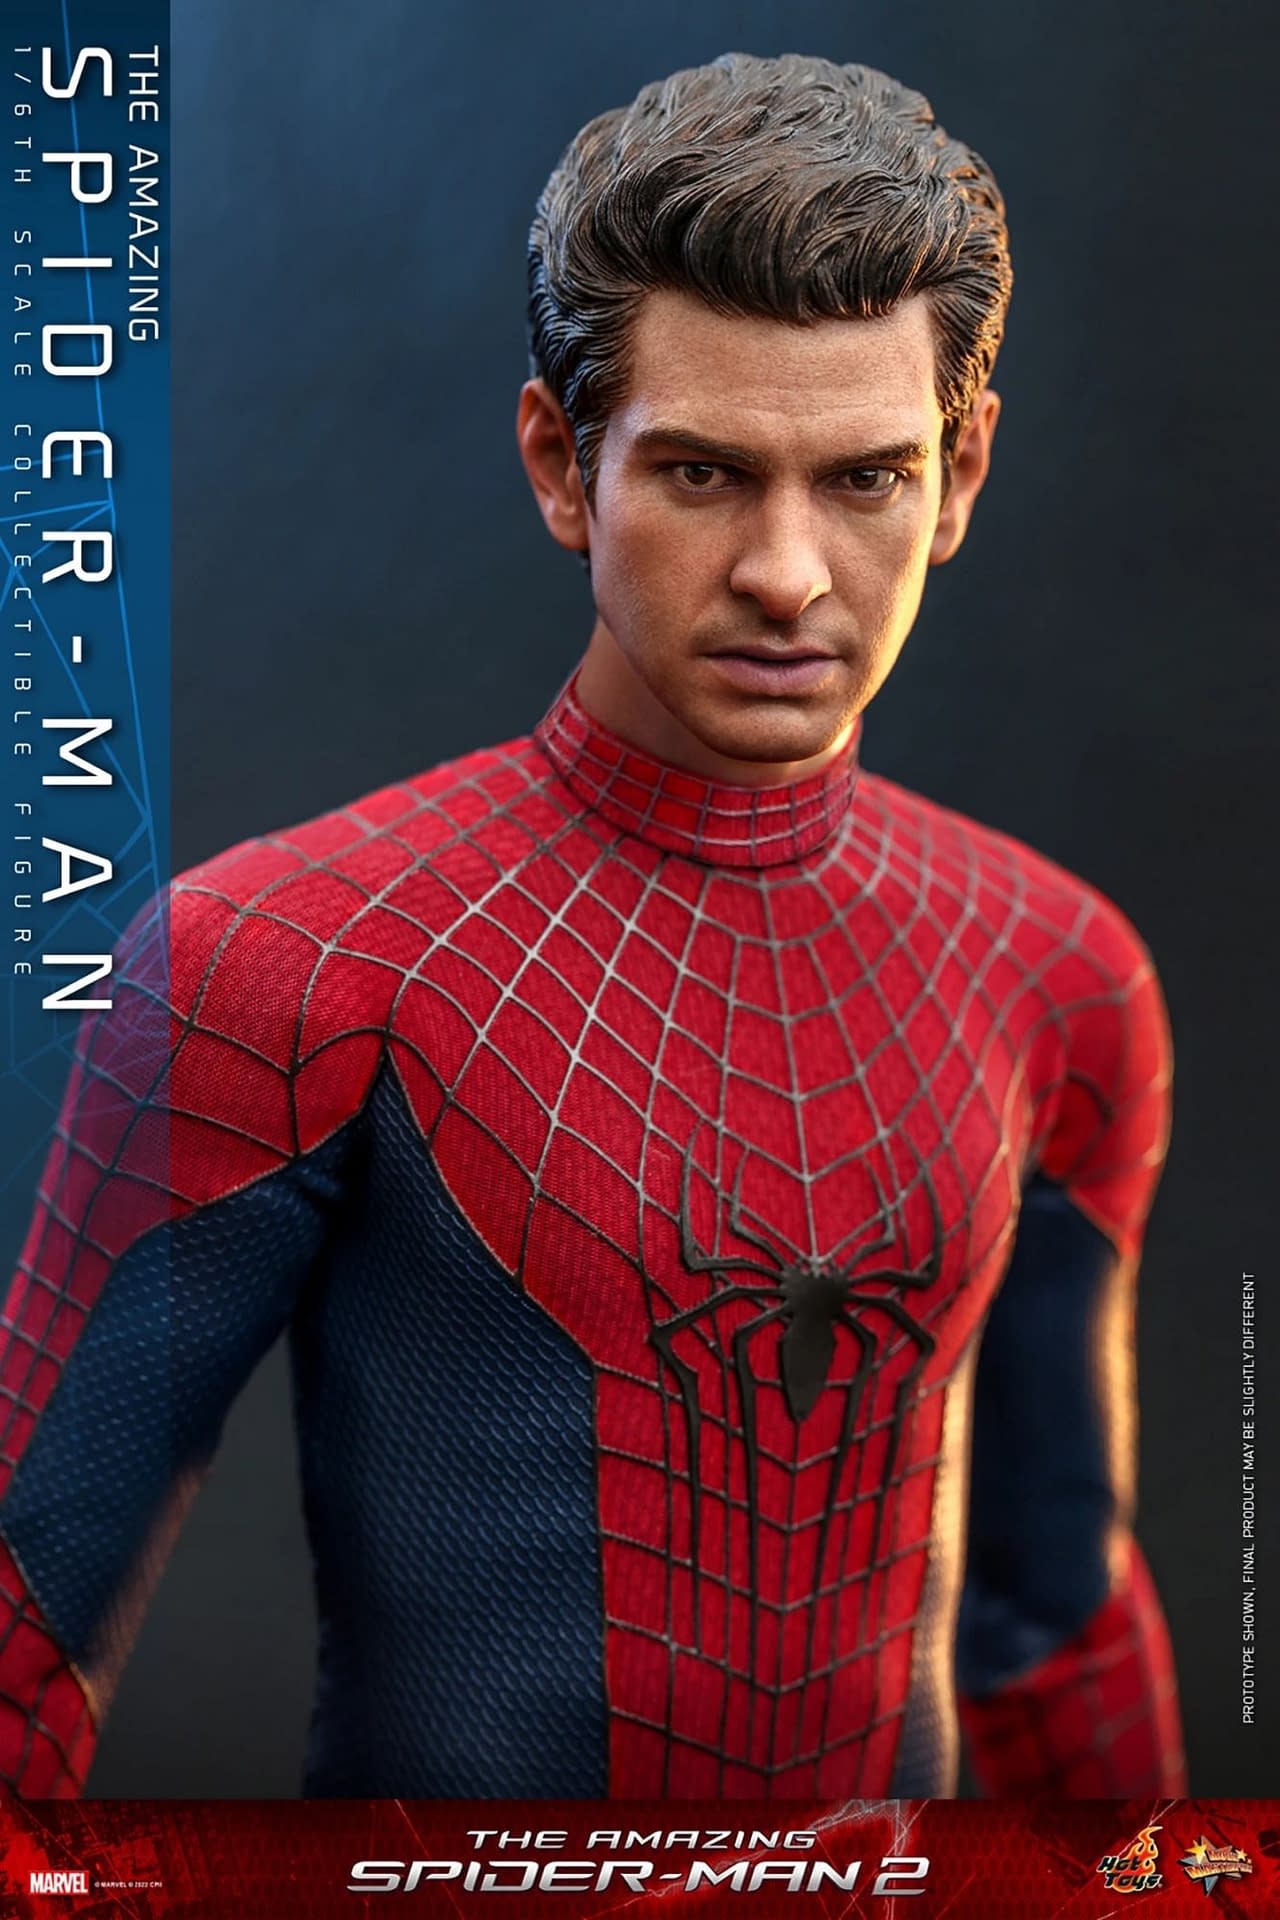 Pre-orders Finally Arrive for Hot Toys The Amazing Spider-Man 2 Figure 